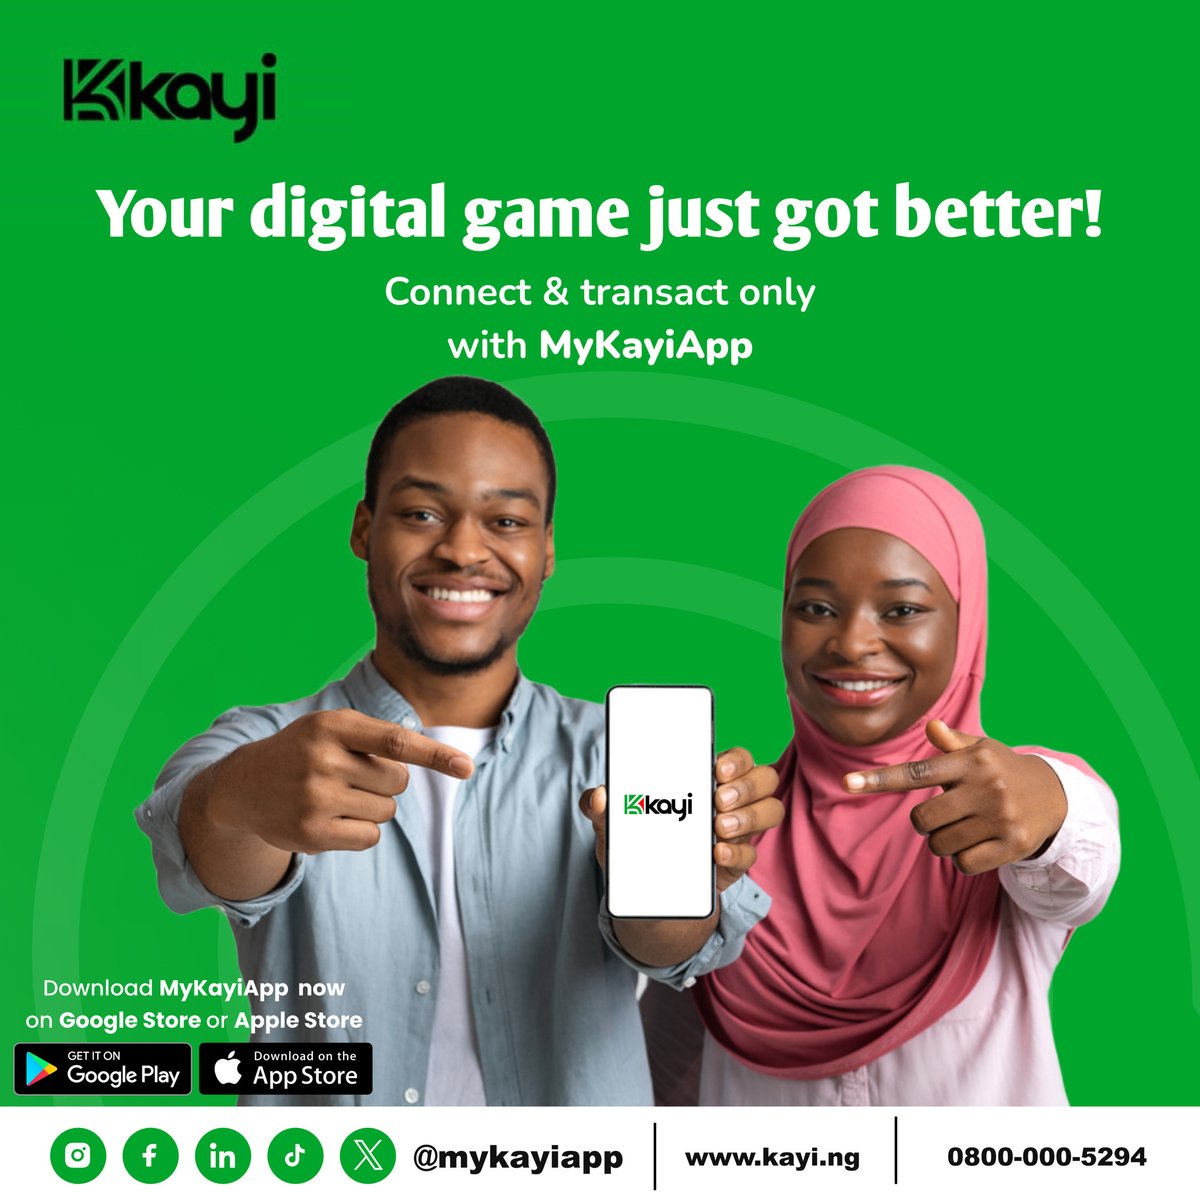 Your digital game can only get fun with Kayiapp. Connect, transact and embrace the future of digital banking with Kayi! Download now on Google play store and apple app store.

#MyKayiApp #NowLive #Kayiway #DownloadNow #Bankingwithoutlimits #downloadmykayiapp